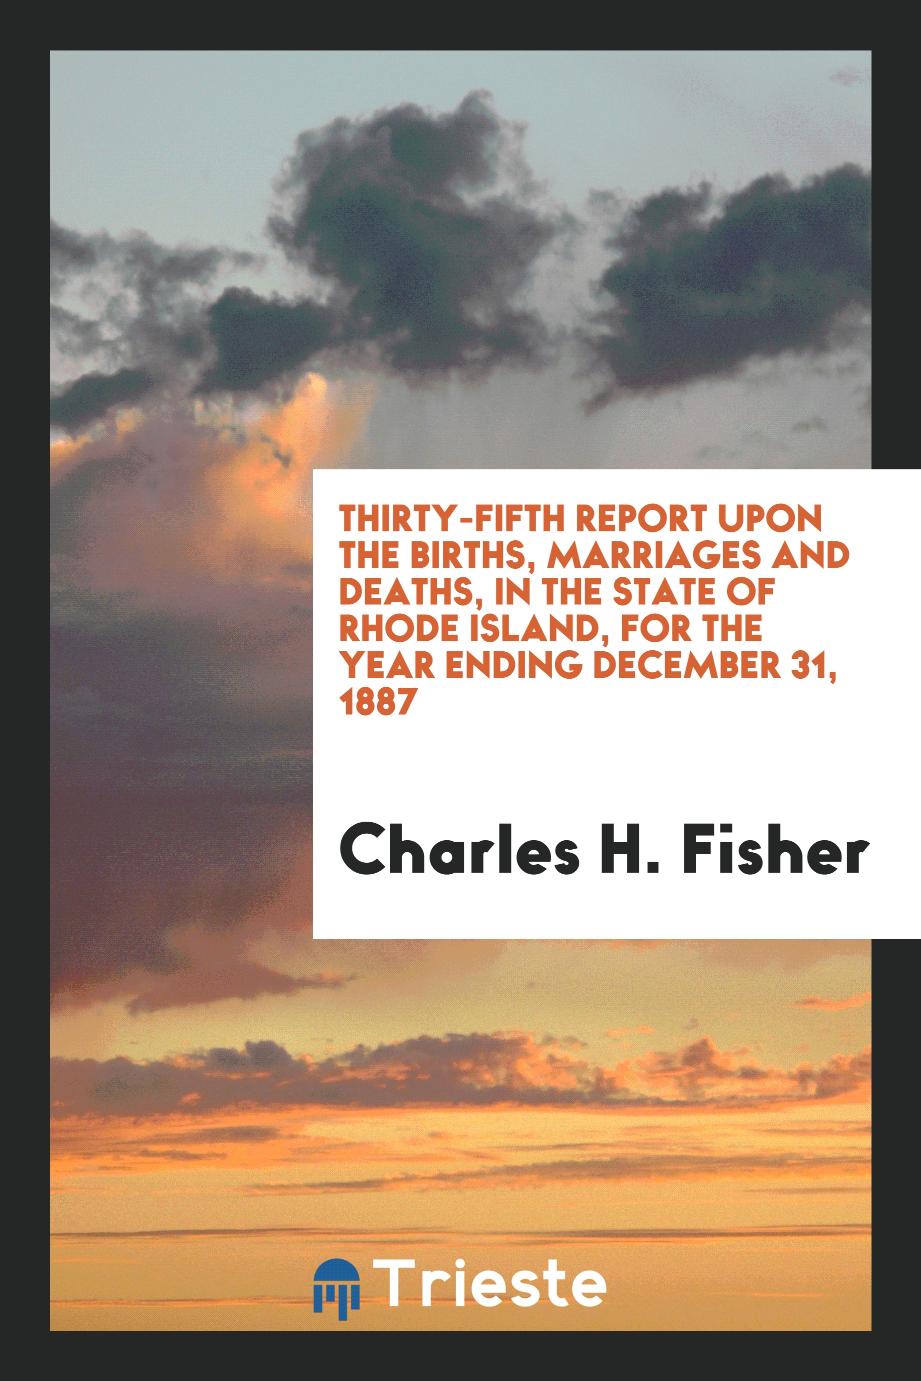 Thirty-Fifth Report upon the Births, Marriages and Deaths, in the State of Rhode Island, for the Year Ending December 31, 1887